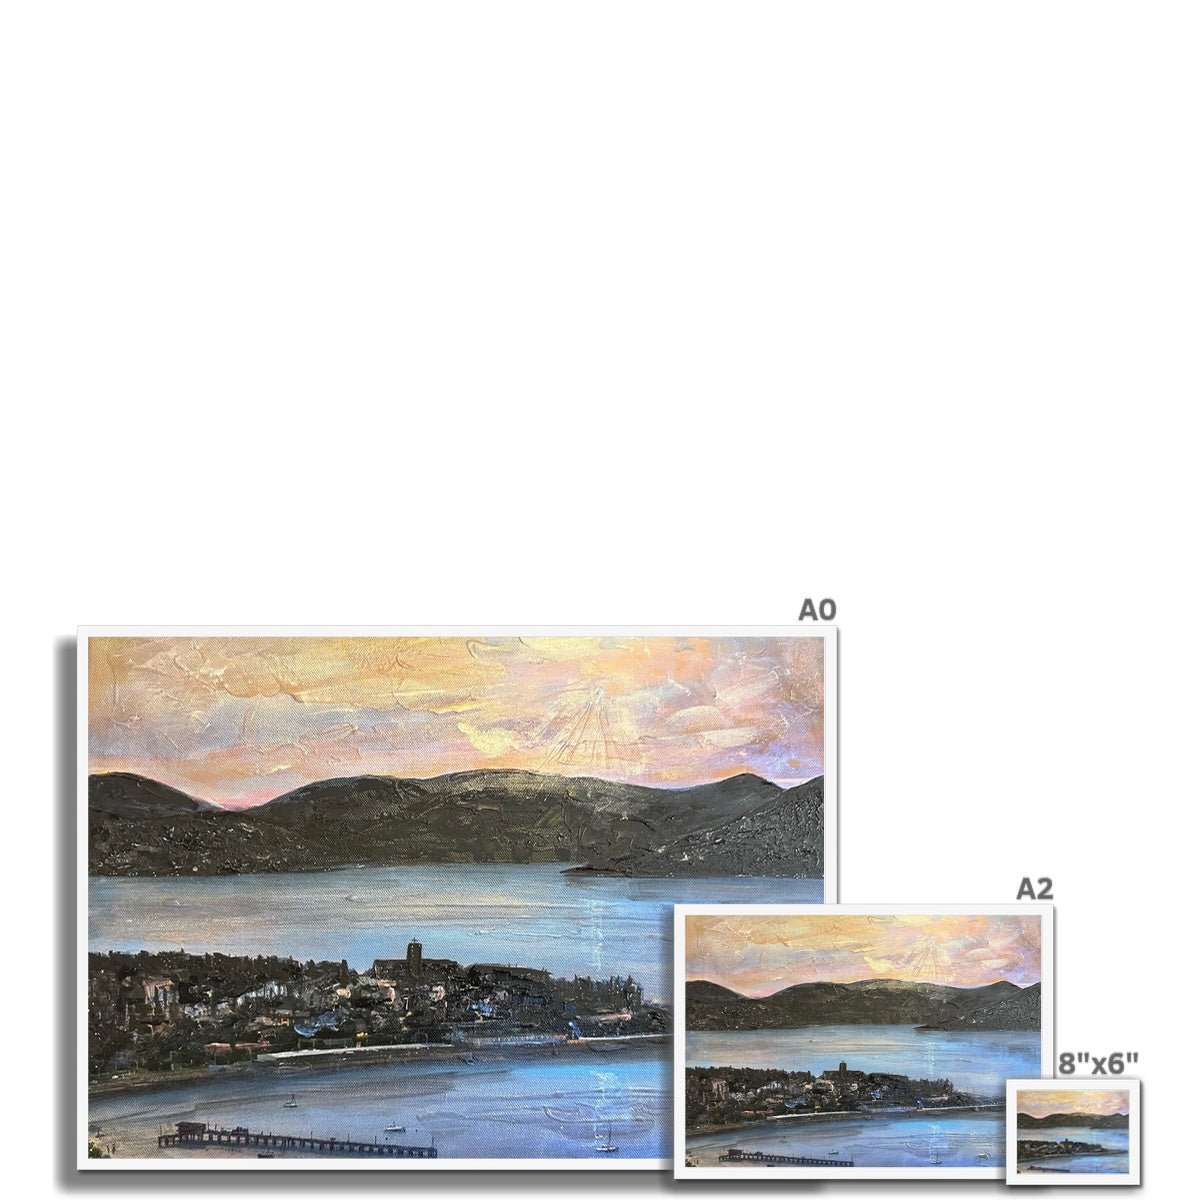 From Lyle Hill Painting | Framed Prints From Scotland-Framed Prints-River Clyde Art Gallery-Paintings, Prints, Homeware, Art Gifts From Scotland By Scottish Artist Kevin Hunter